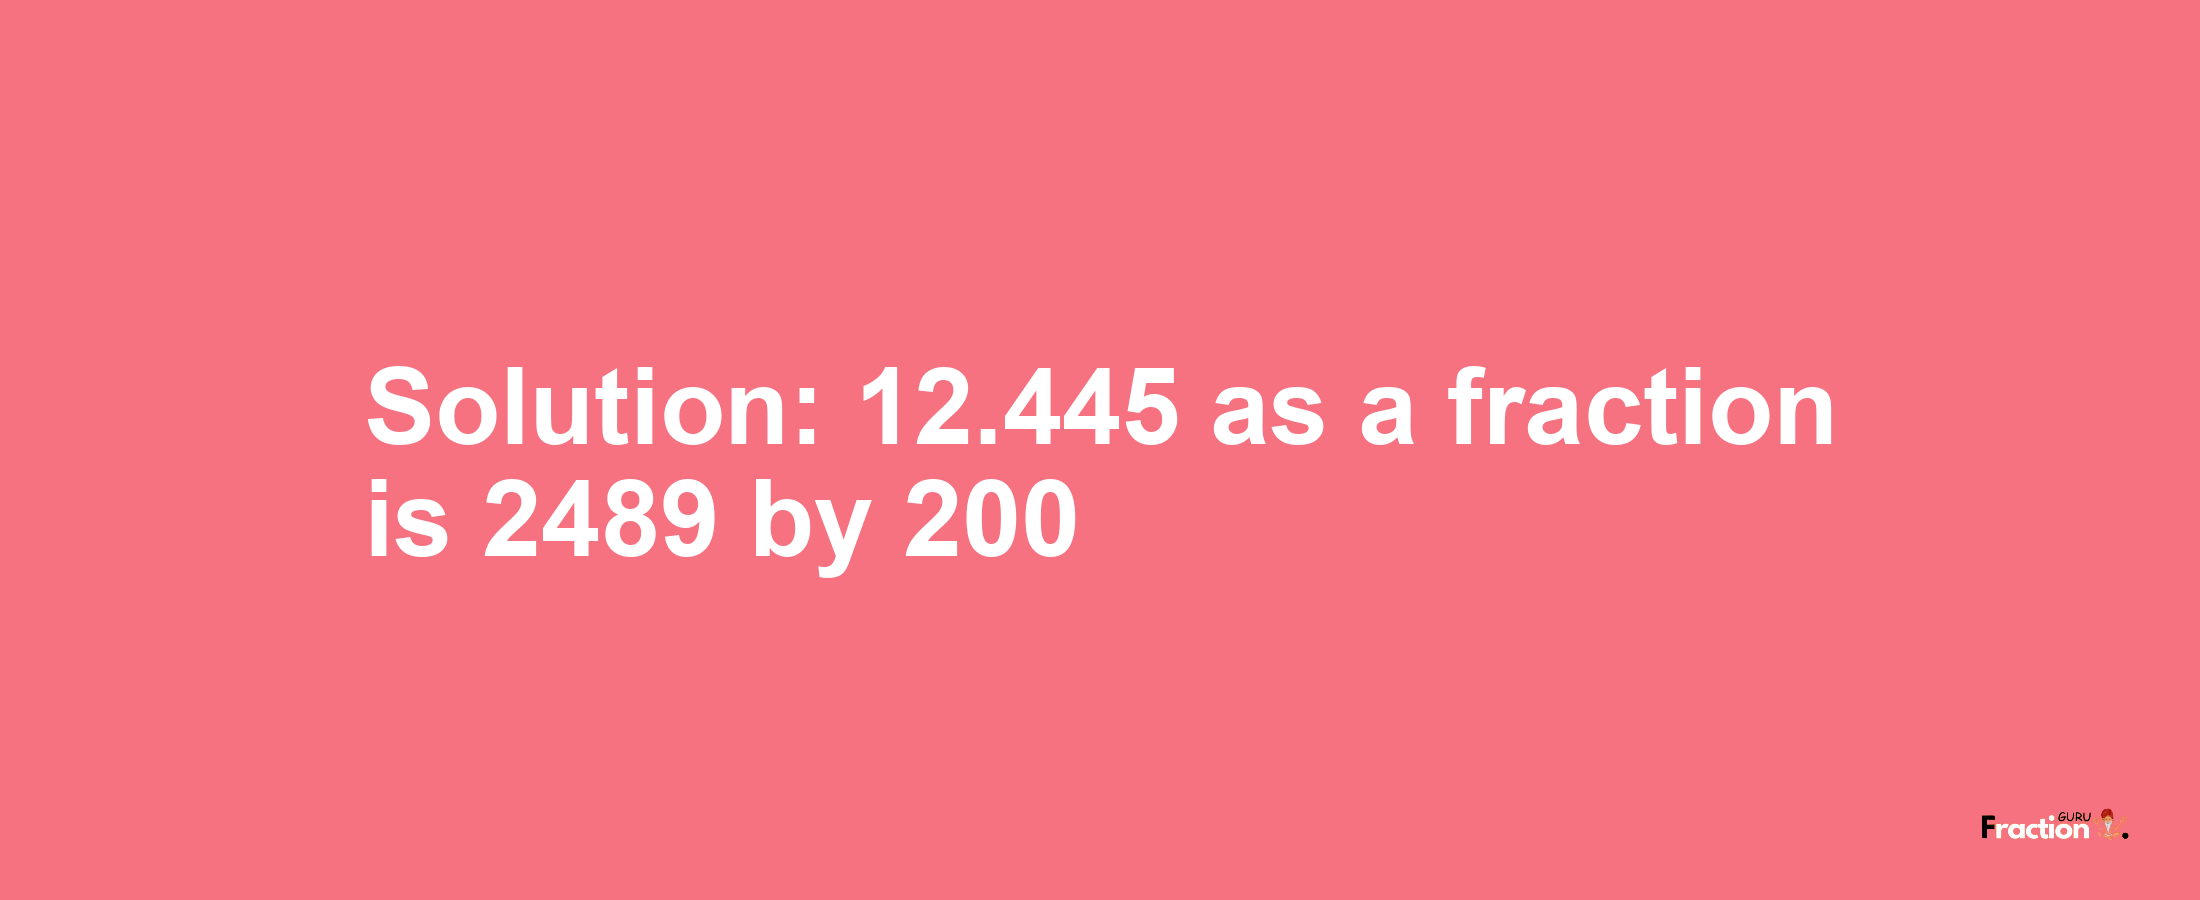 Solution:12.445 as a fraction is 2489/200